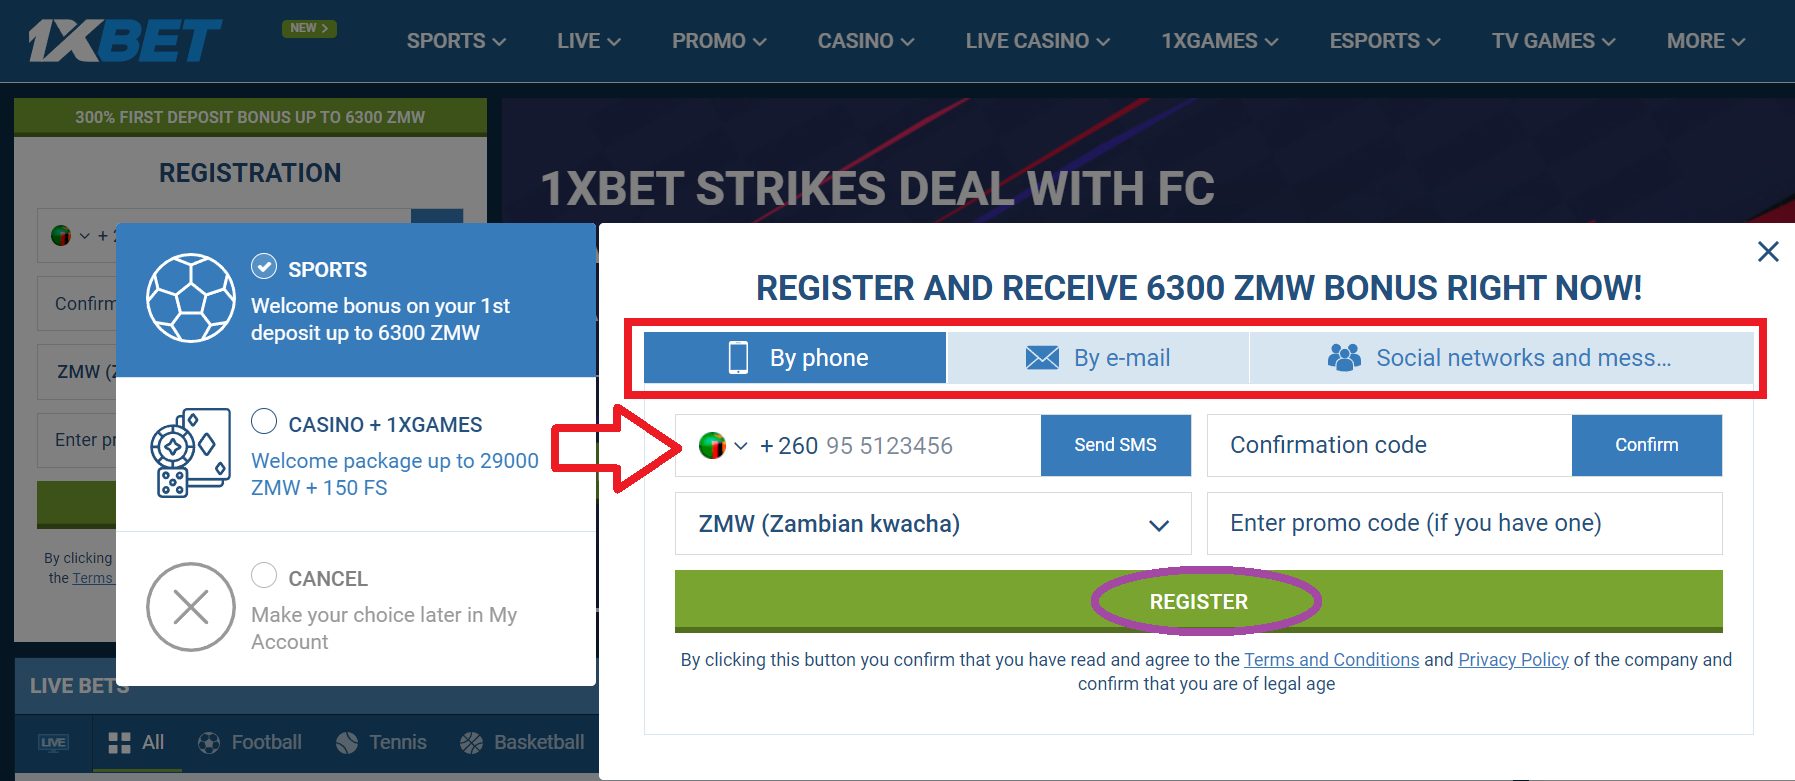 1xBet registration Zambia by phone number